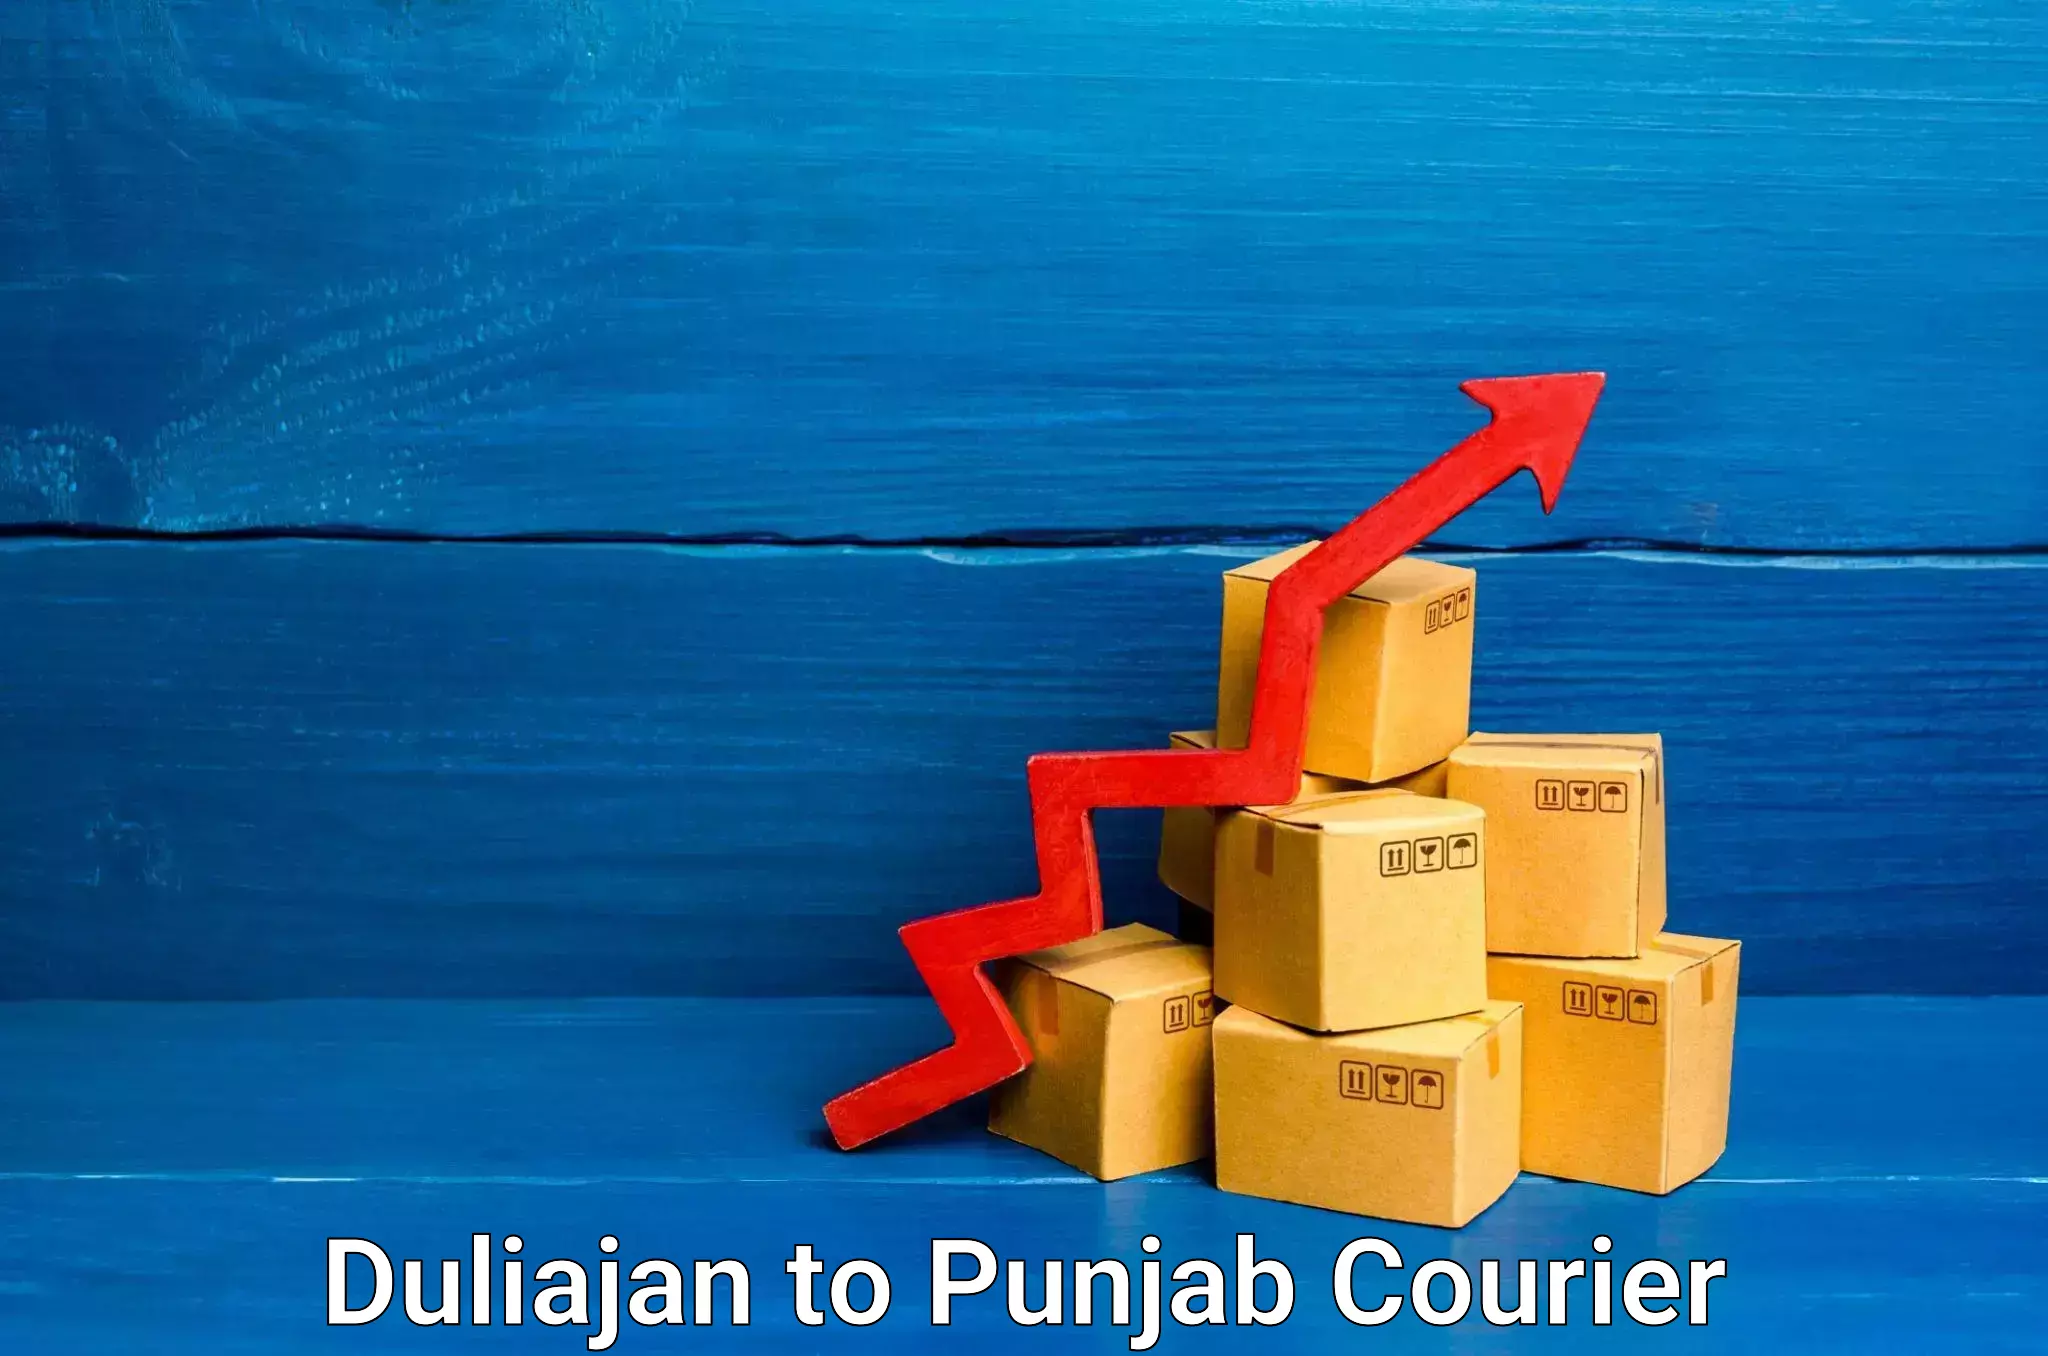 Package delivery network Duliajan to Ludhiana